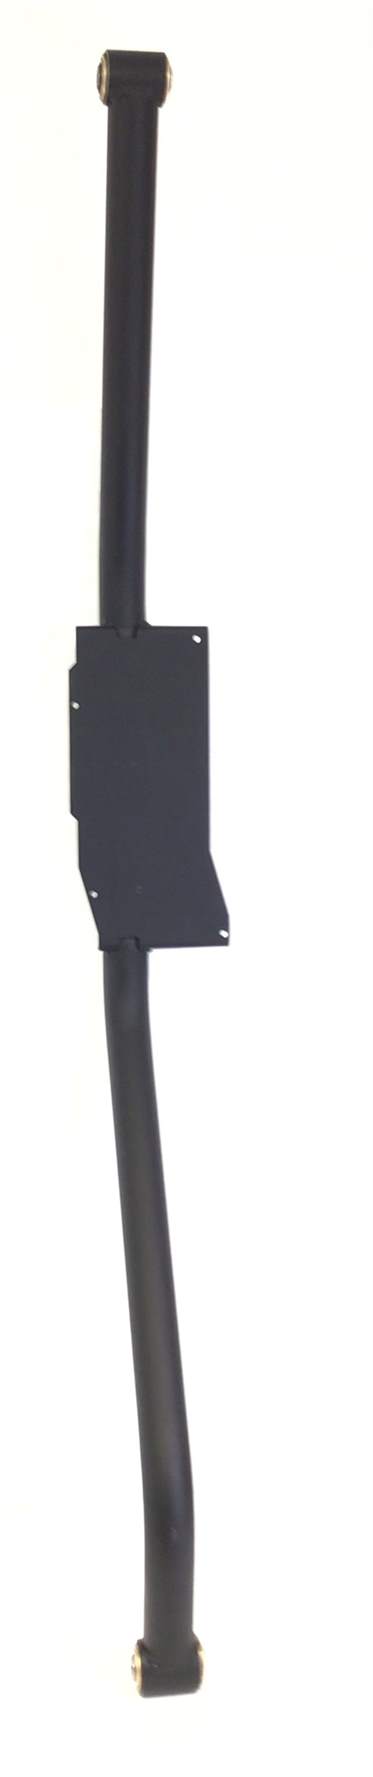 Pedal arm Left (Used)